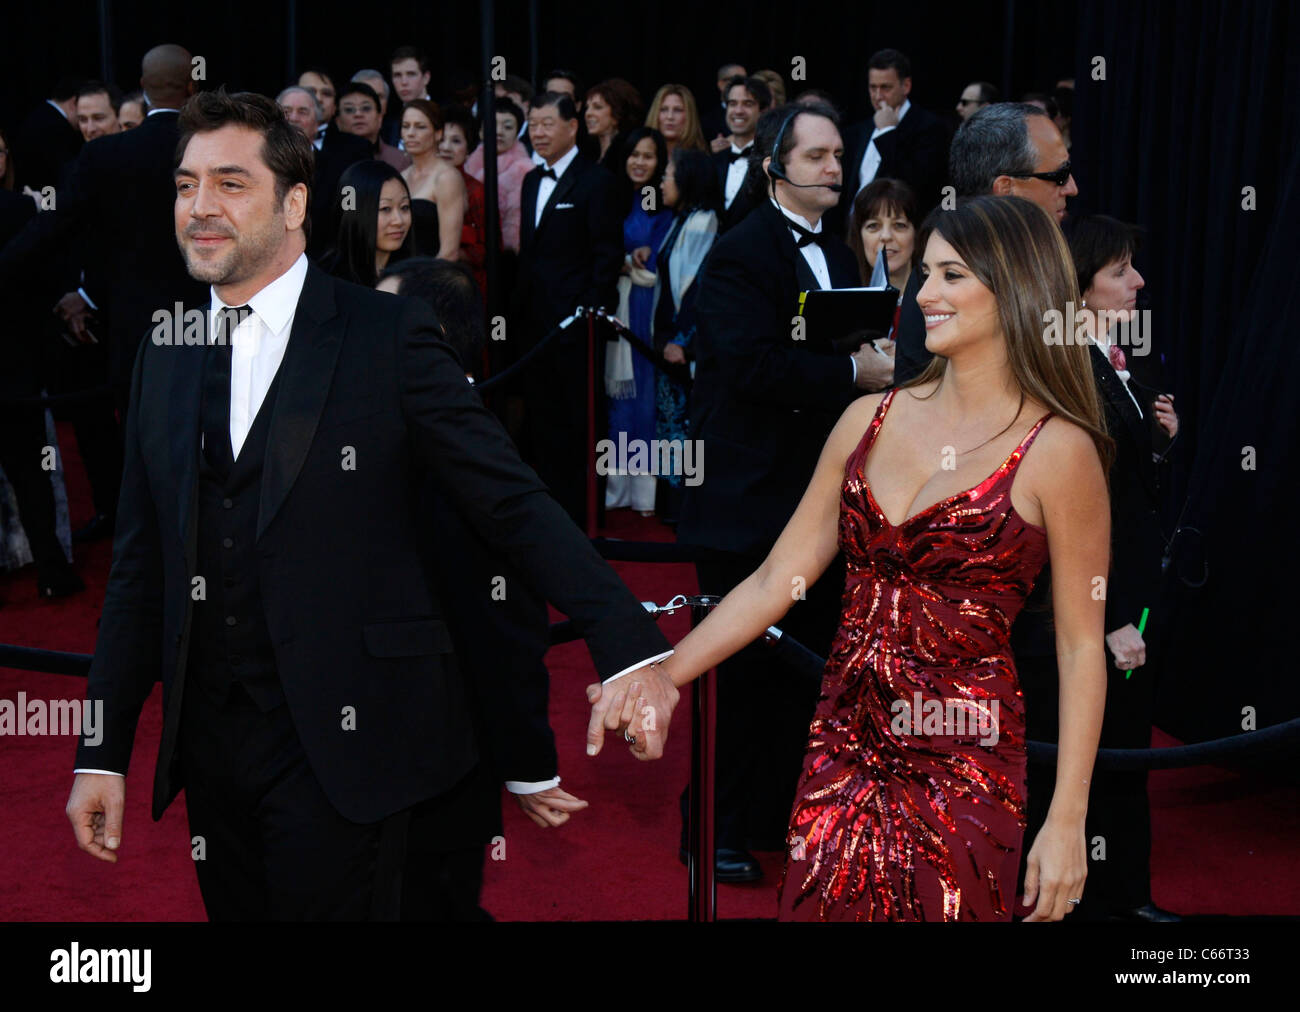 Javier Bardem, Penelope Cruz at arrivals for The 83rd Academy Awards Oscars - Arrivals Part 1, The Kodak Theatre, Los Angeles, CA February 27, 2011. Photo By: Jef Hernandez/Everett Collection Stock Photo